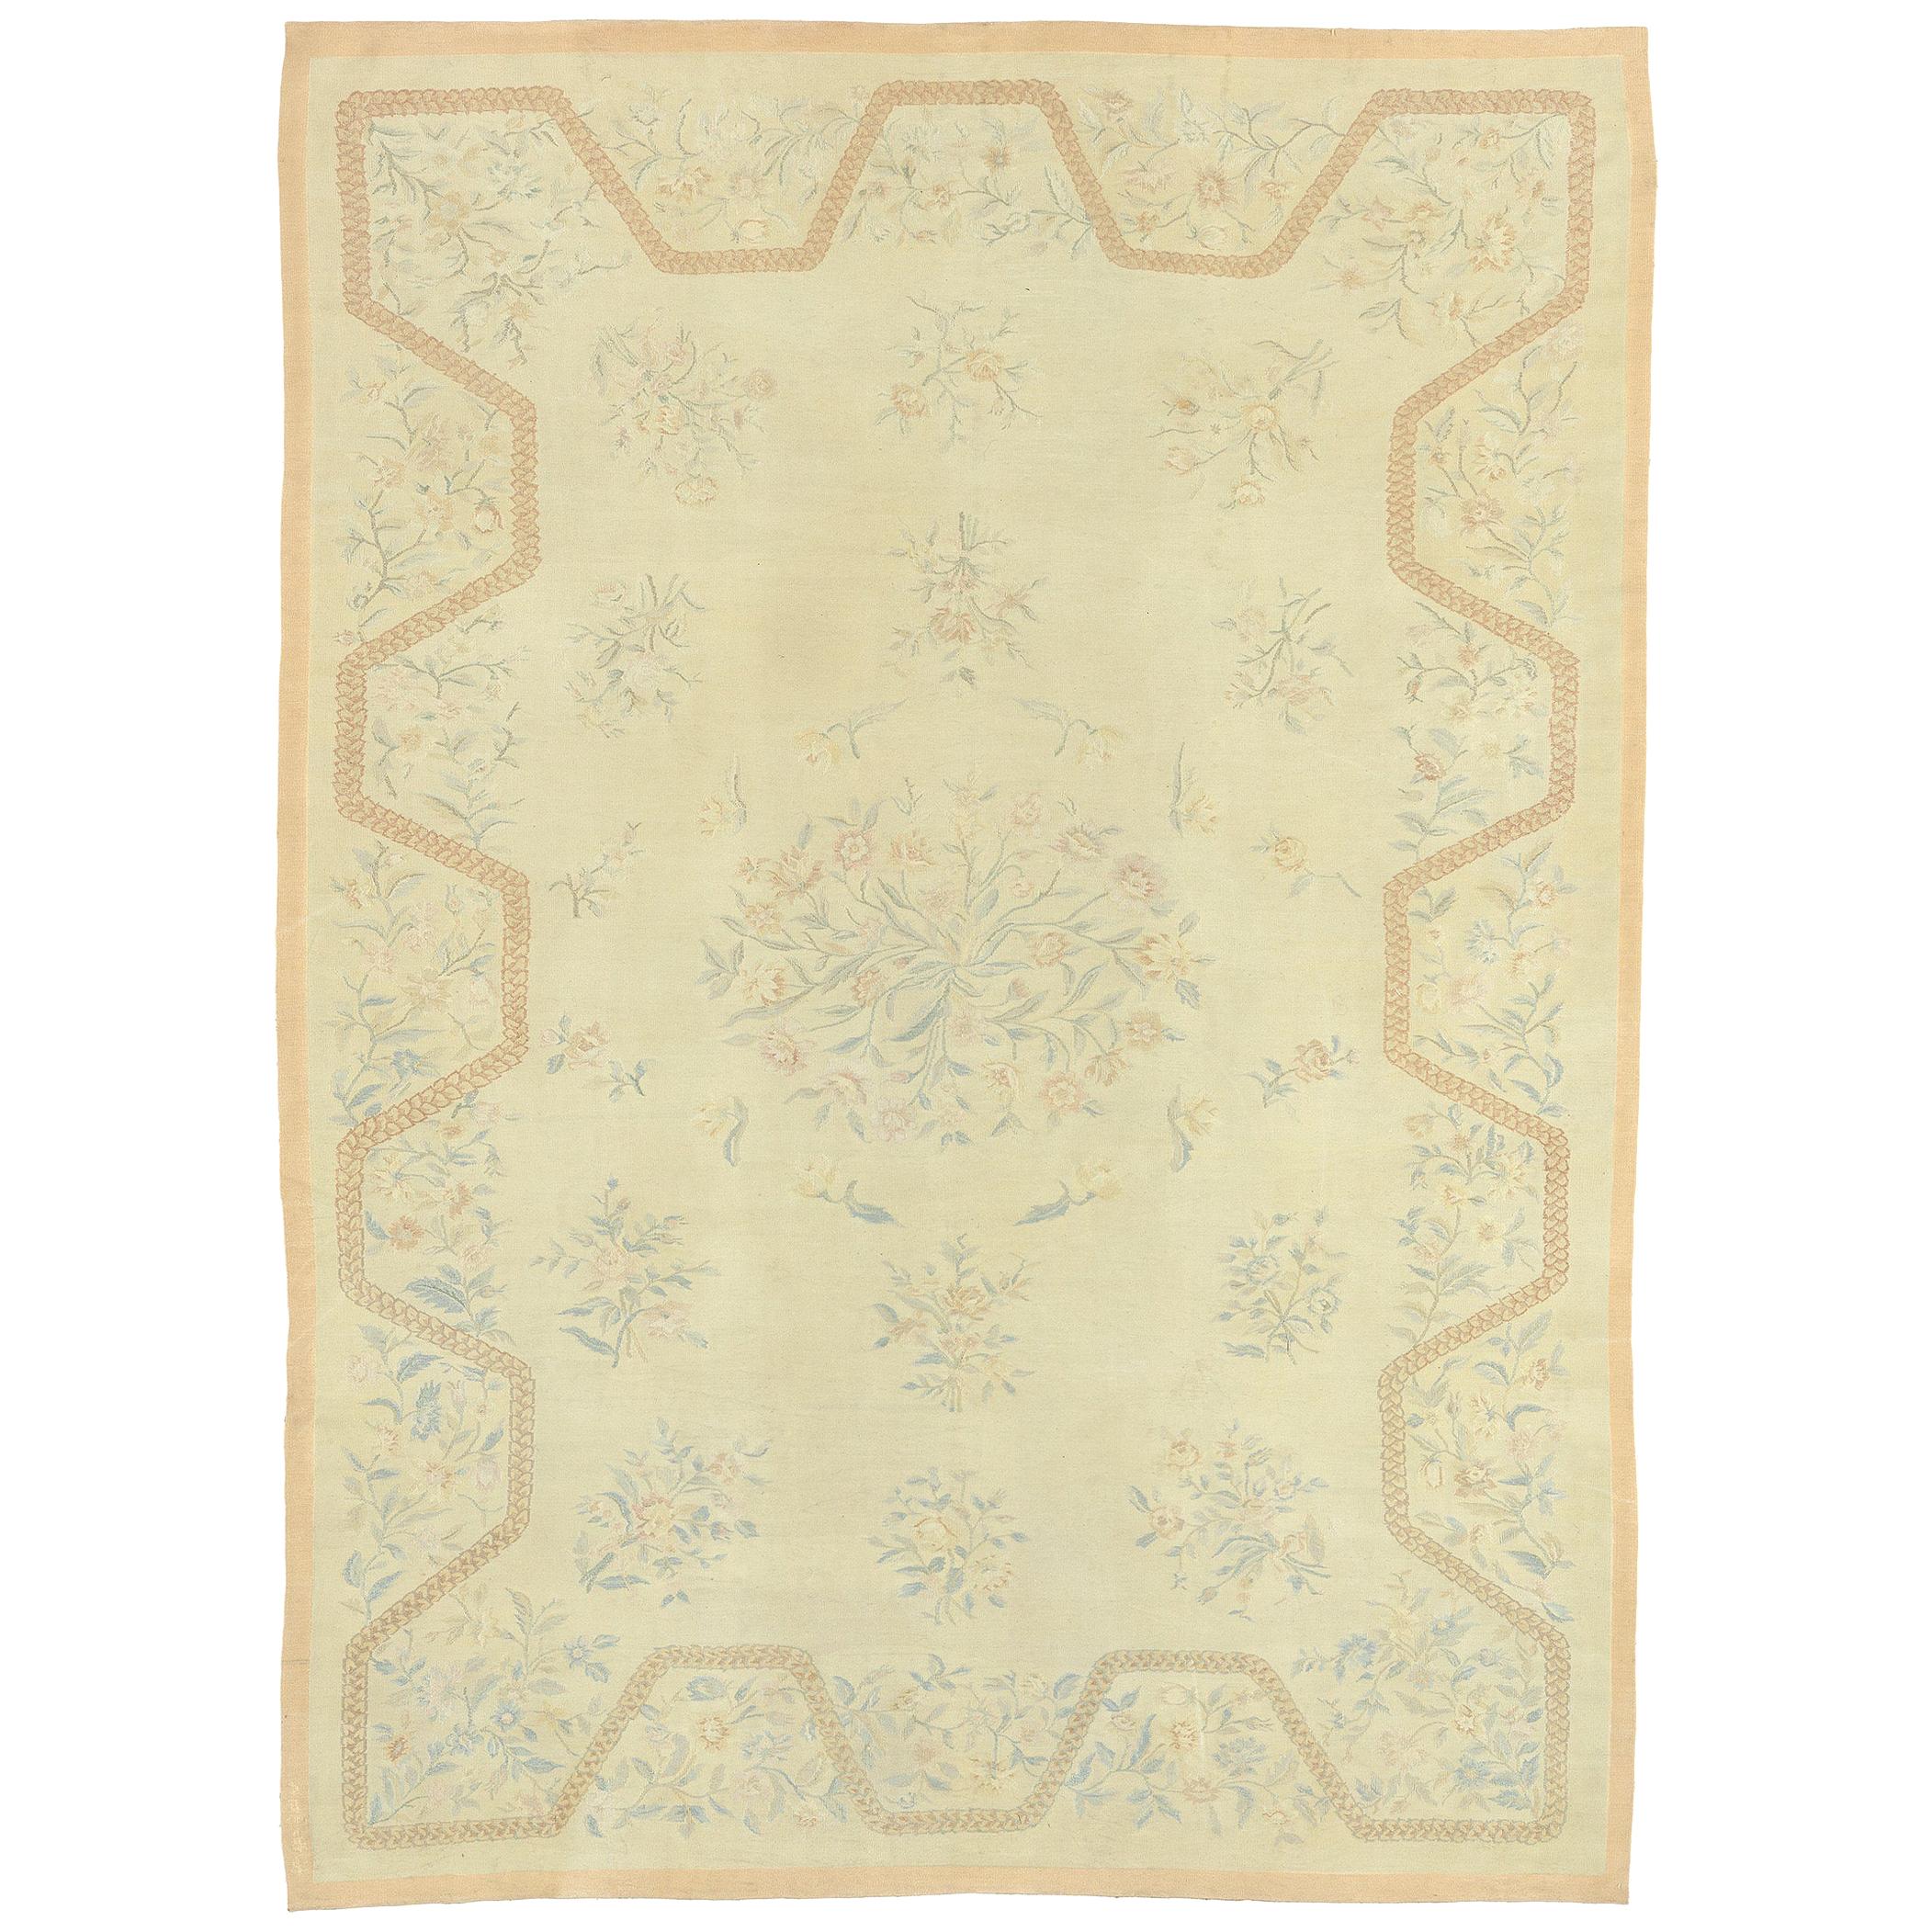 Early 20th Century French Aubusson Rug For Sale